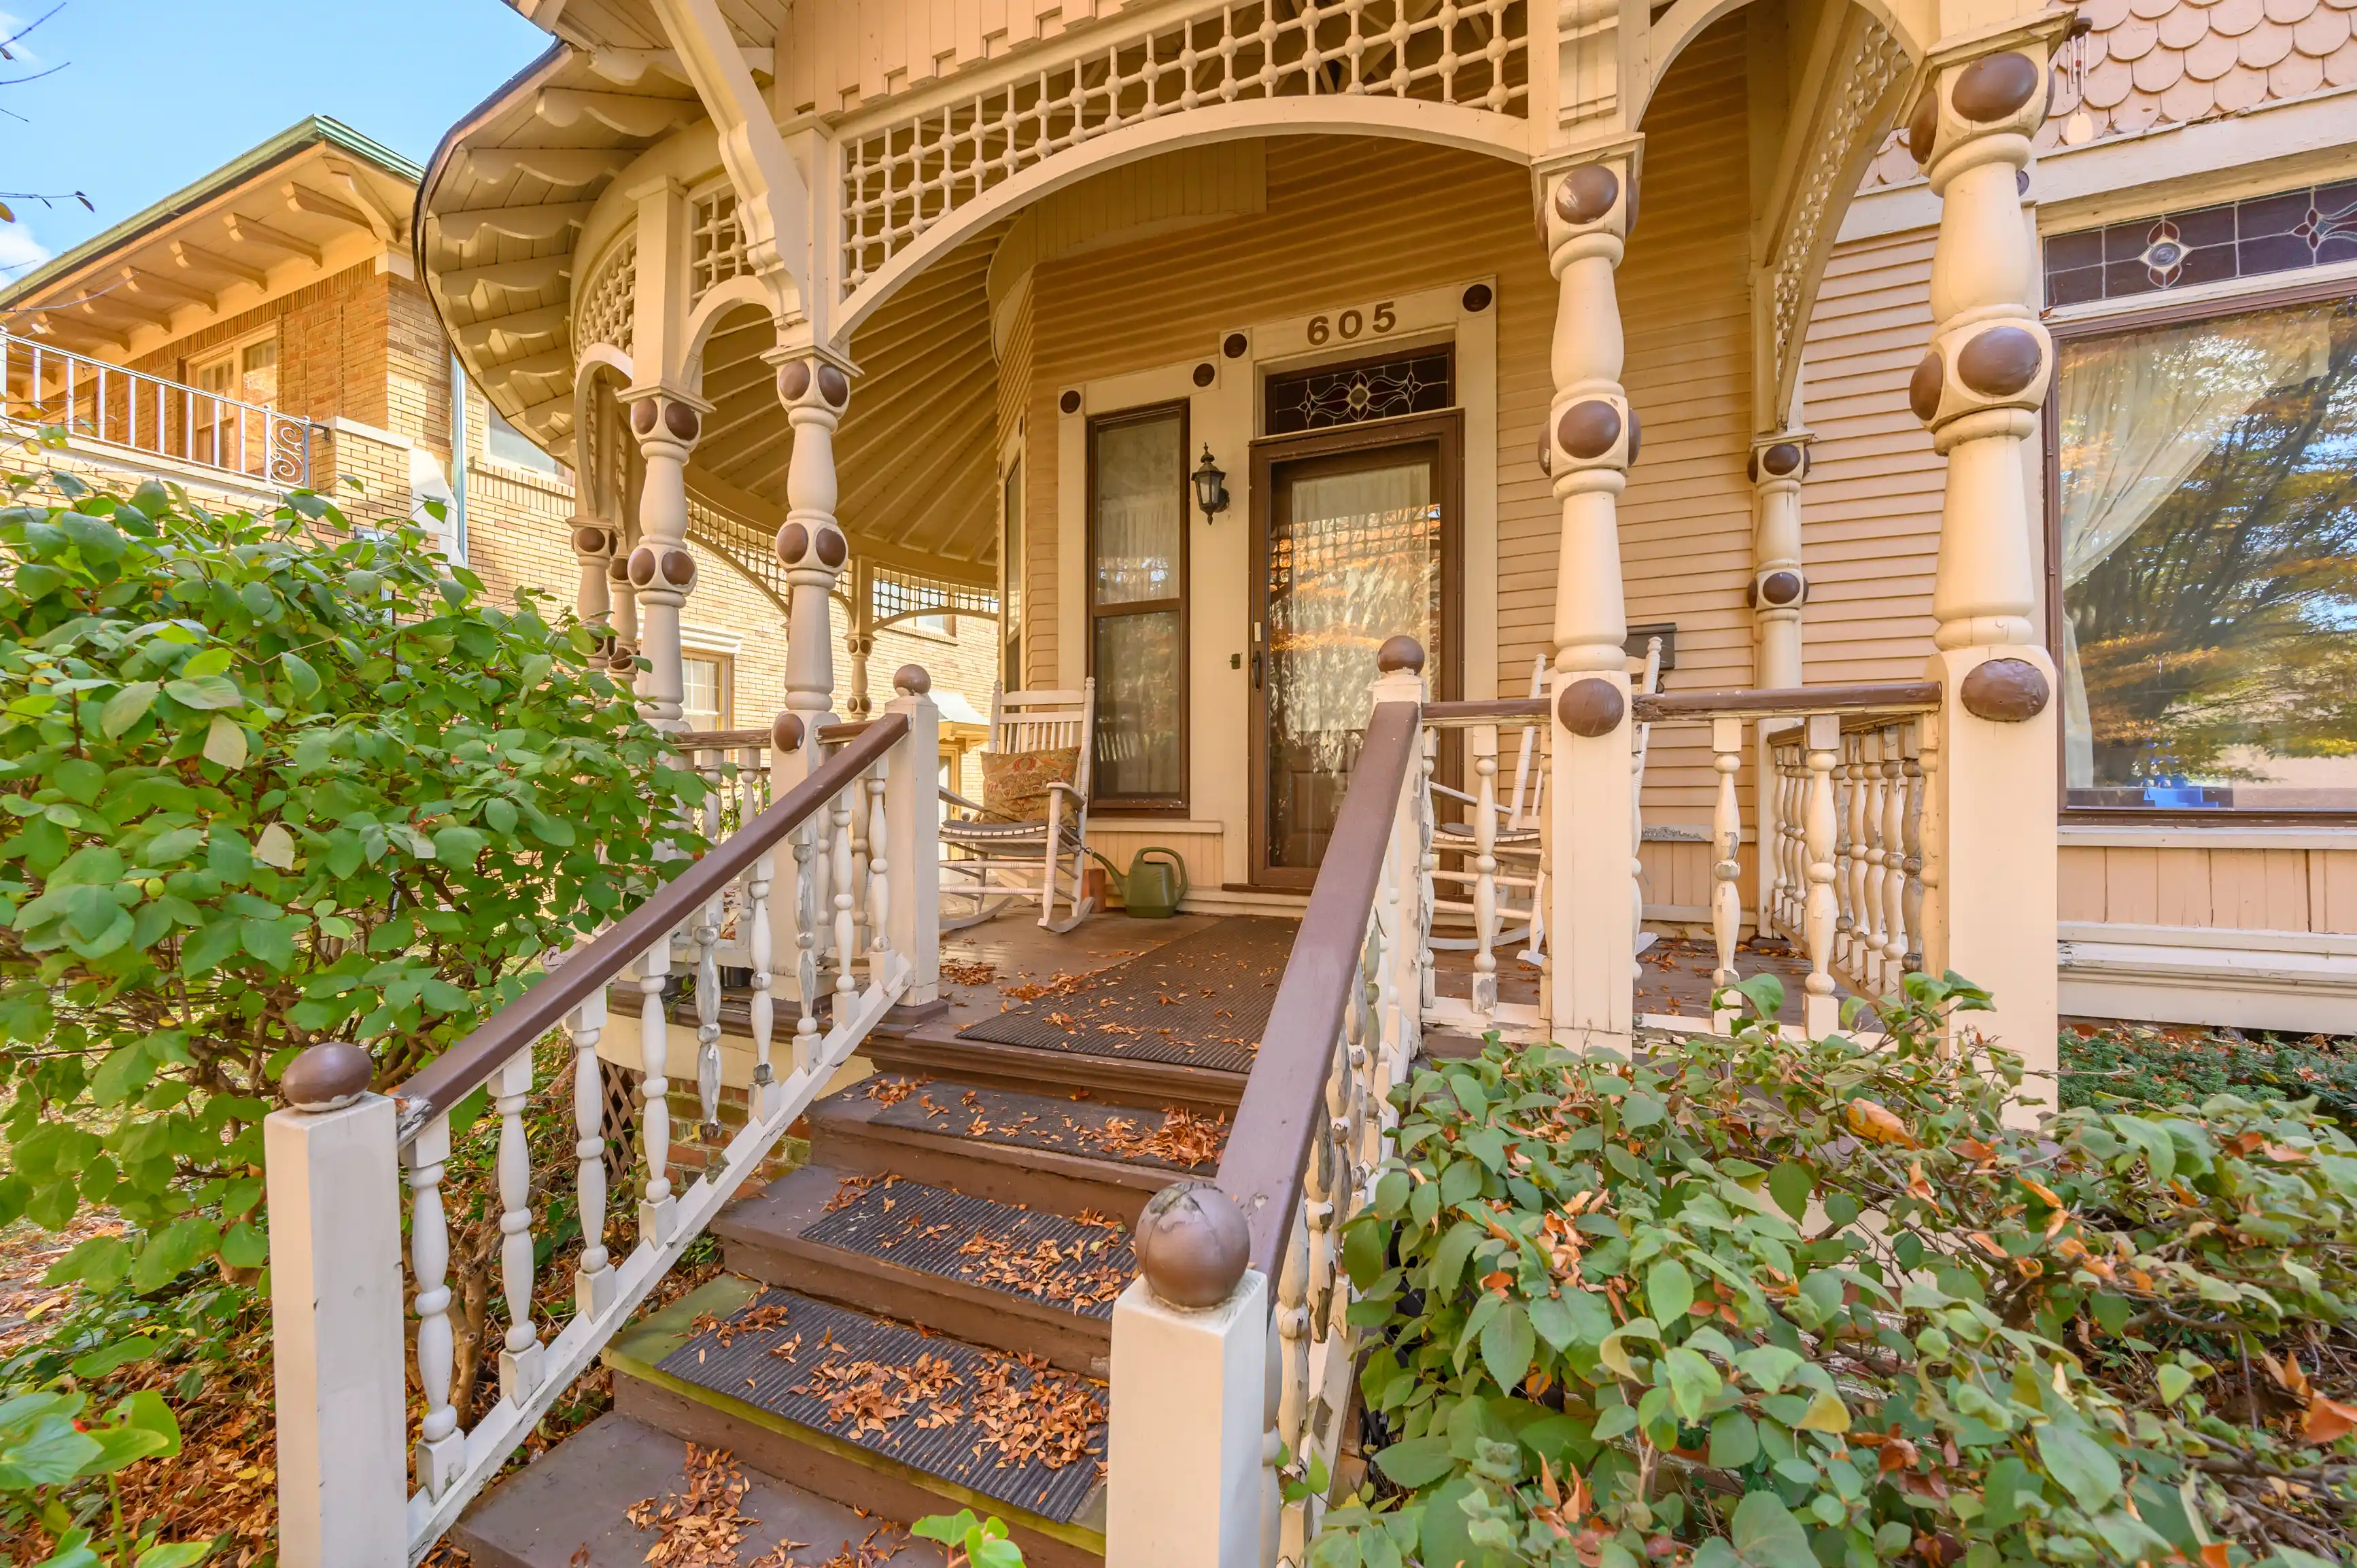 Charming Victorian style home entrance with an inviting porch featuring ornate wooden columns, decorative railings, and steps with scattered autumn leaves.